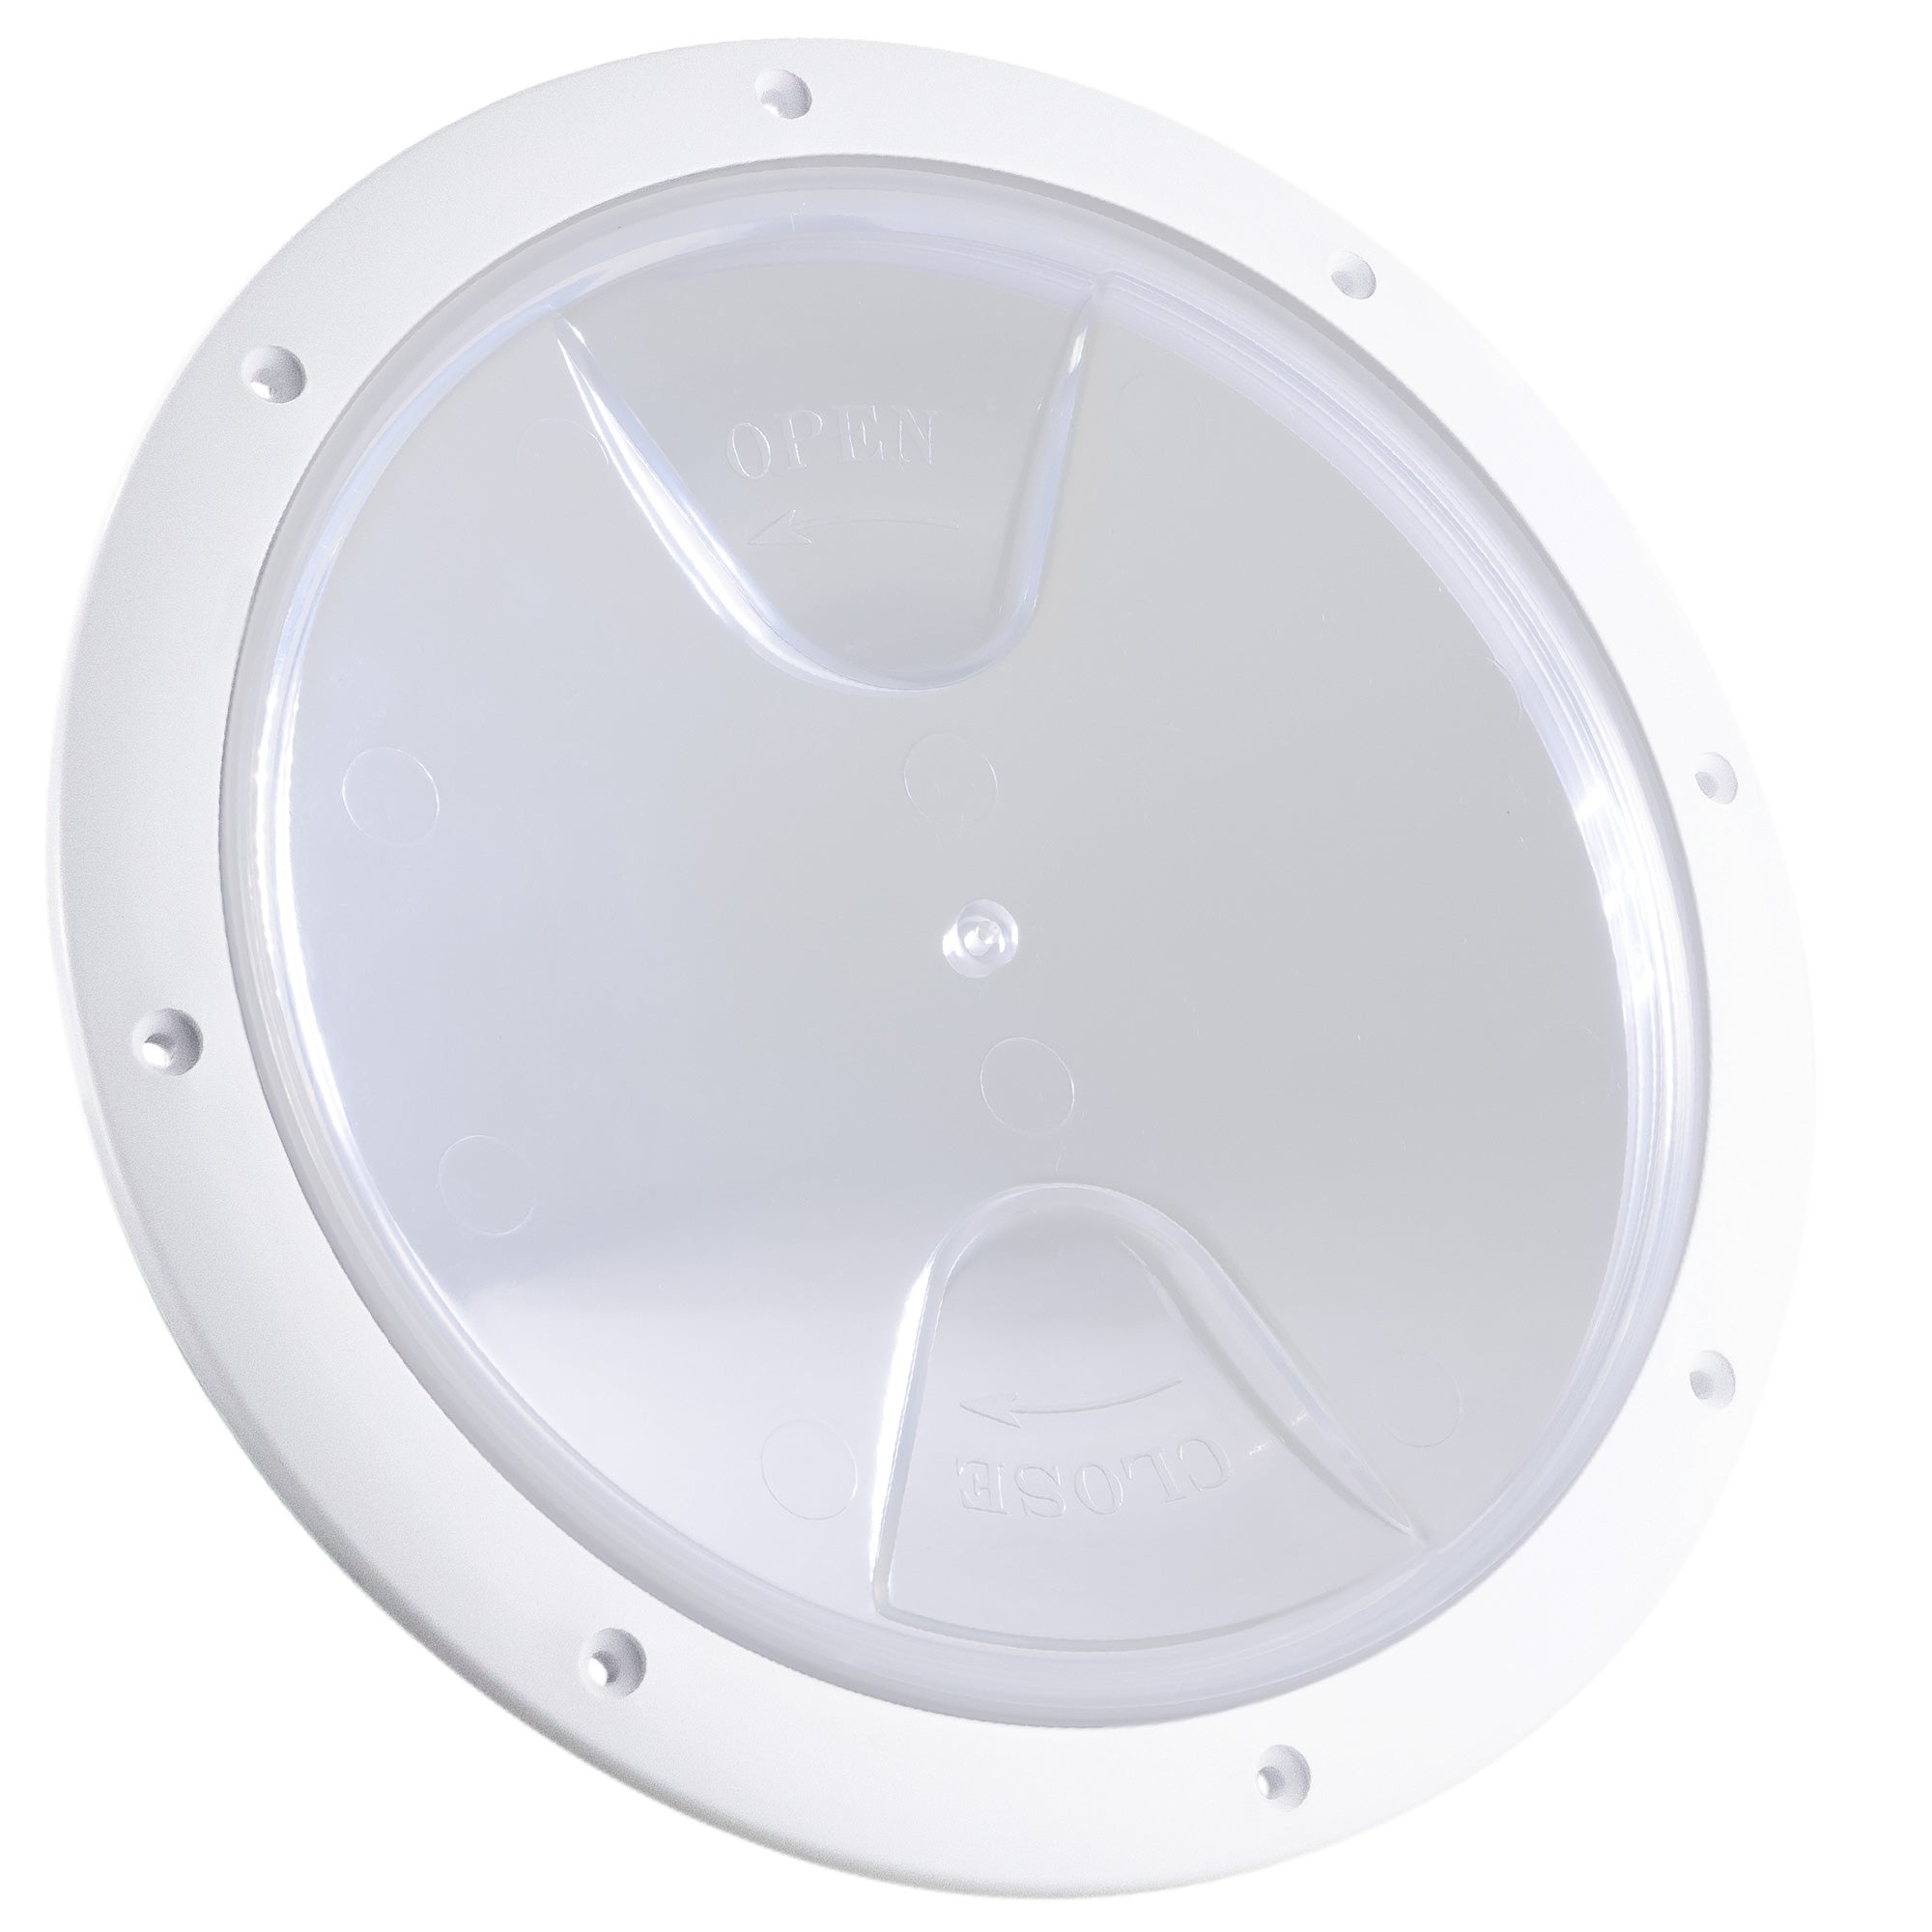 8" Deck Plate, Round White with Clear Lid - FO4466